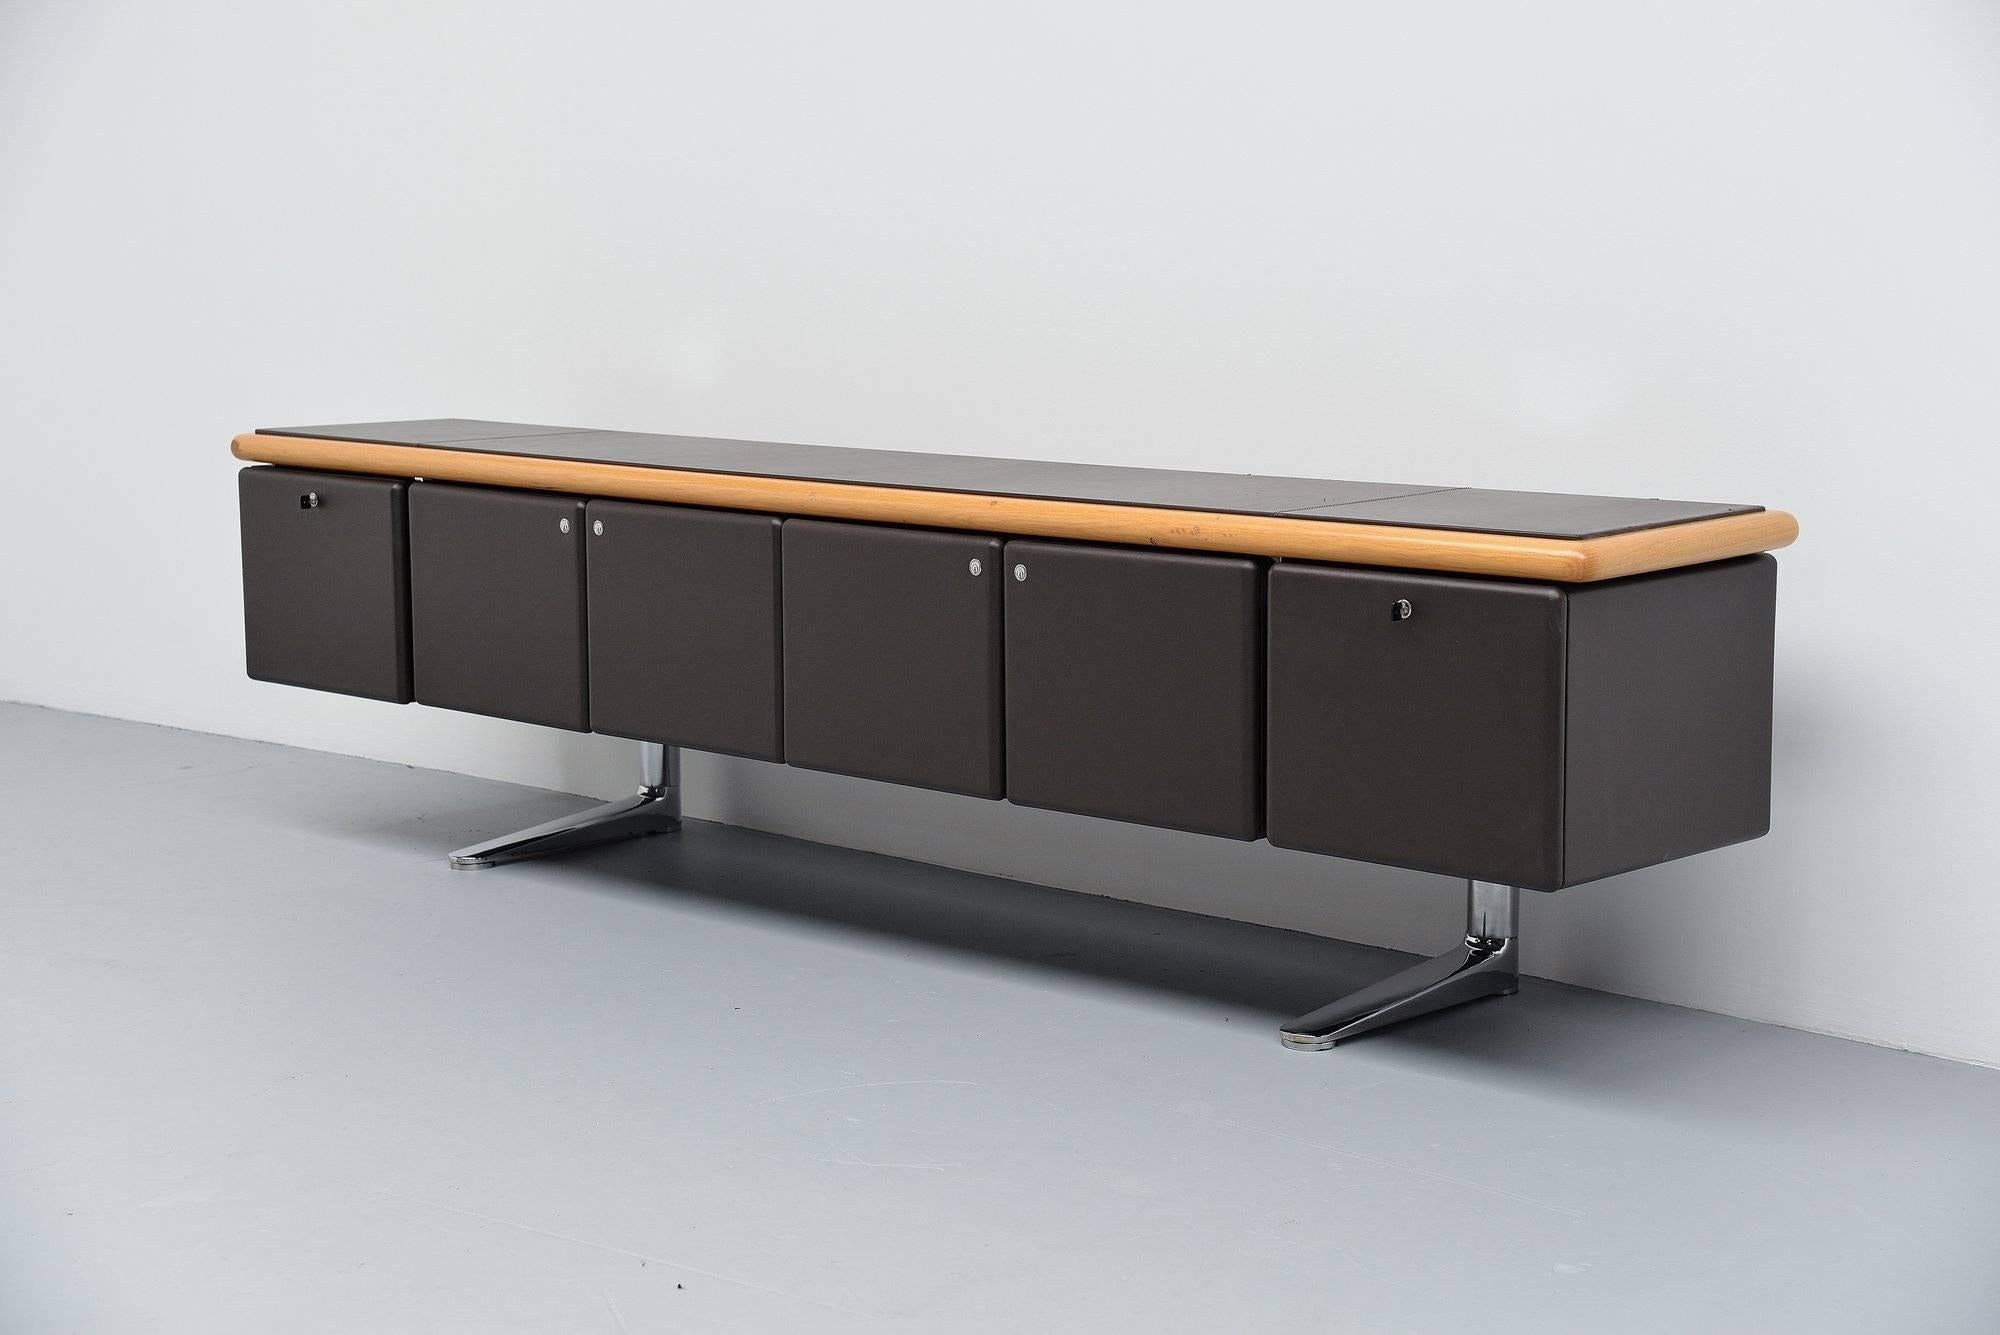 Super quality executive office sideboard from the executive collection designed by Warren platner and manufactured by Knoll International, USA 1973. This sideboard has 2 chrome plated metal legs and a long top with oak edge and dark brown leather